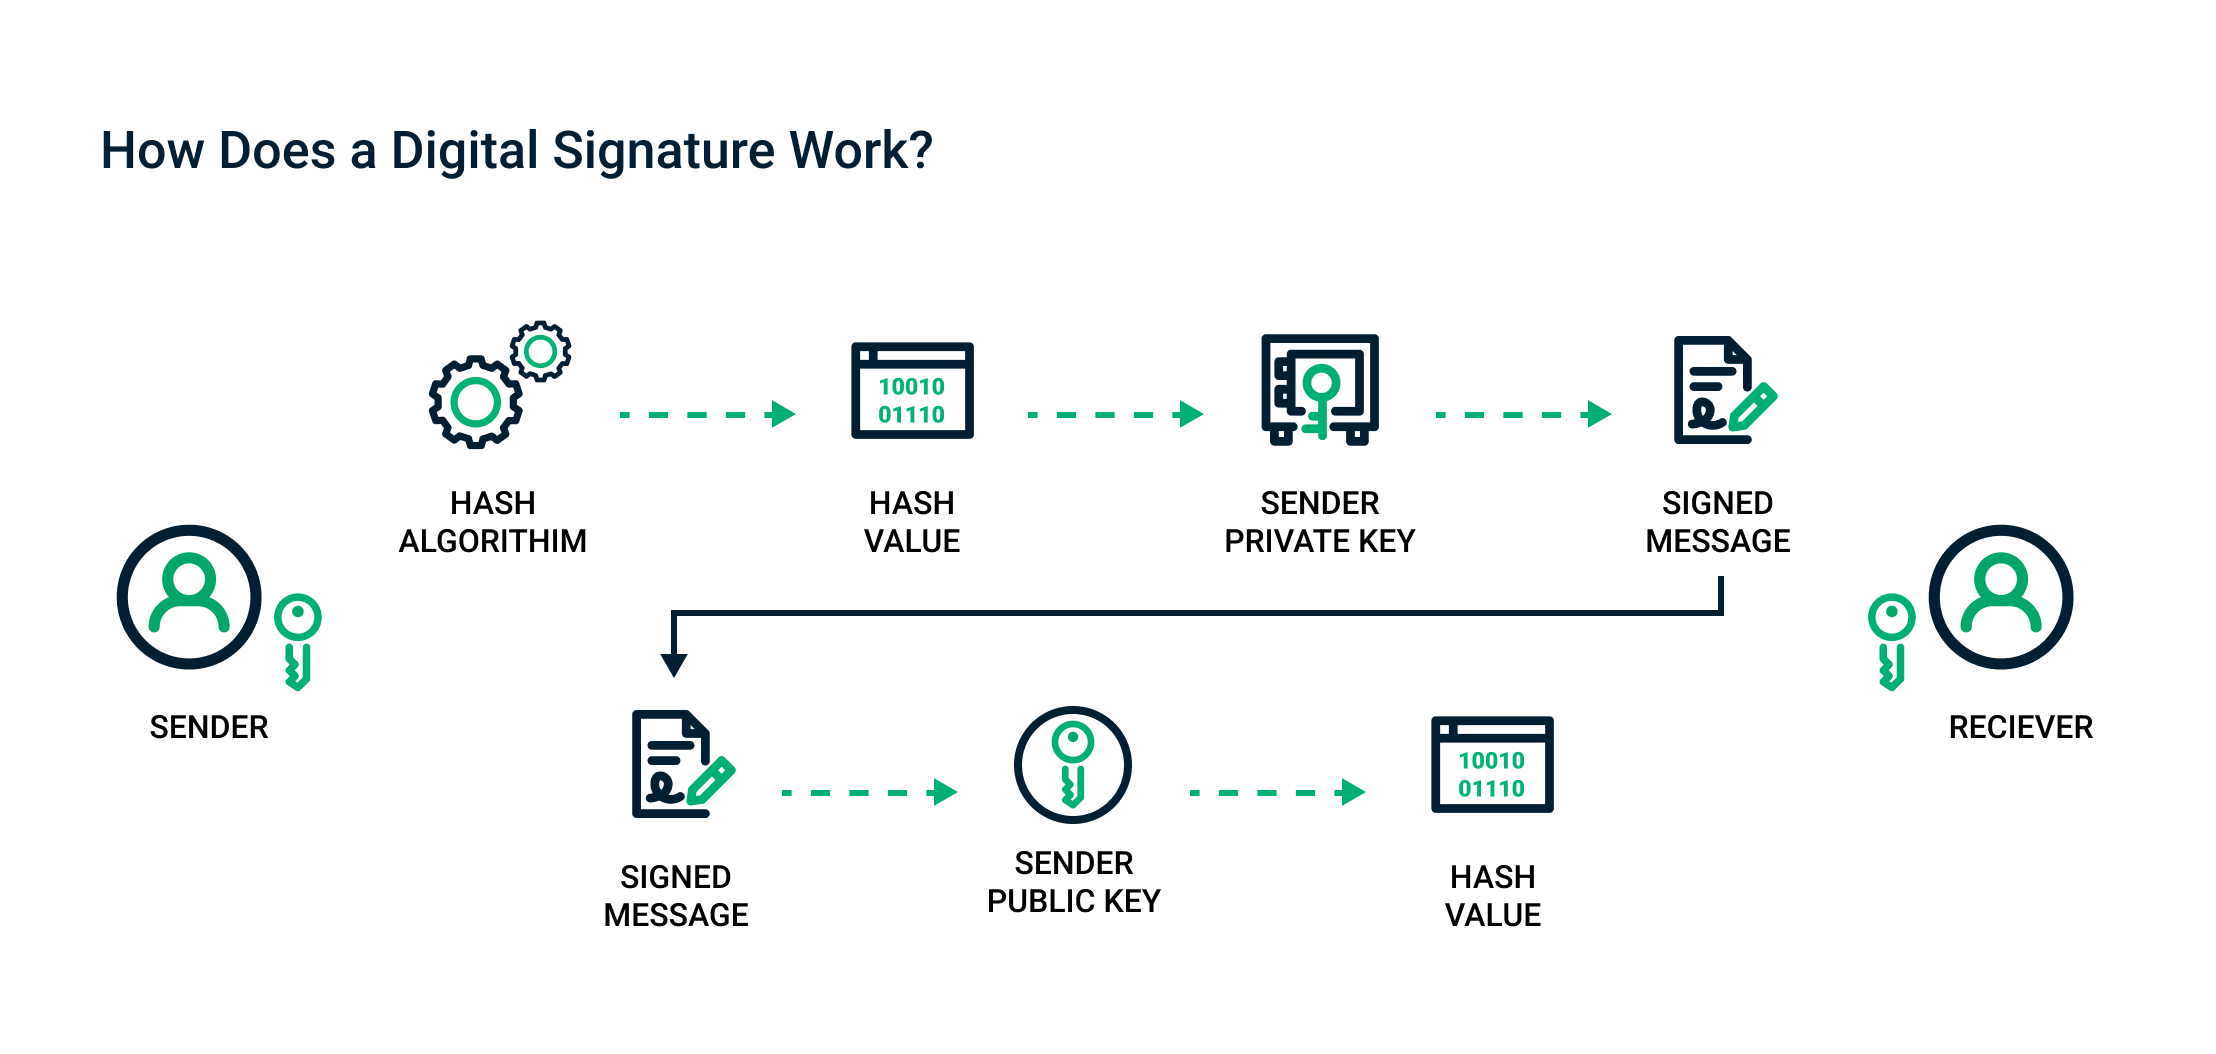 How Does a Digital Signature Work?